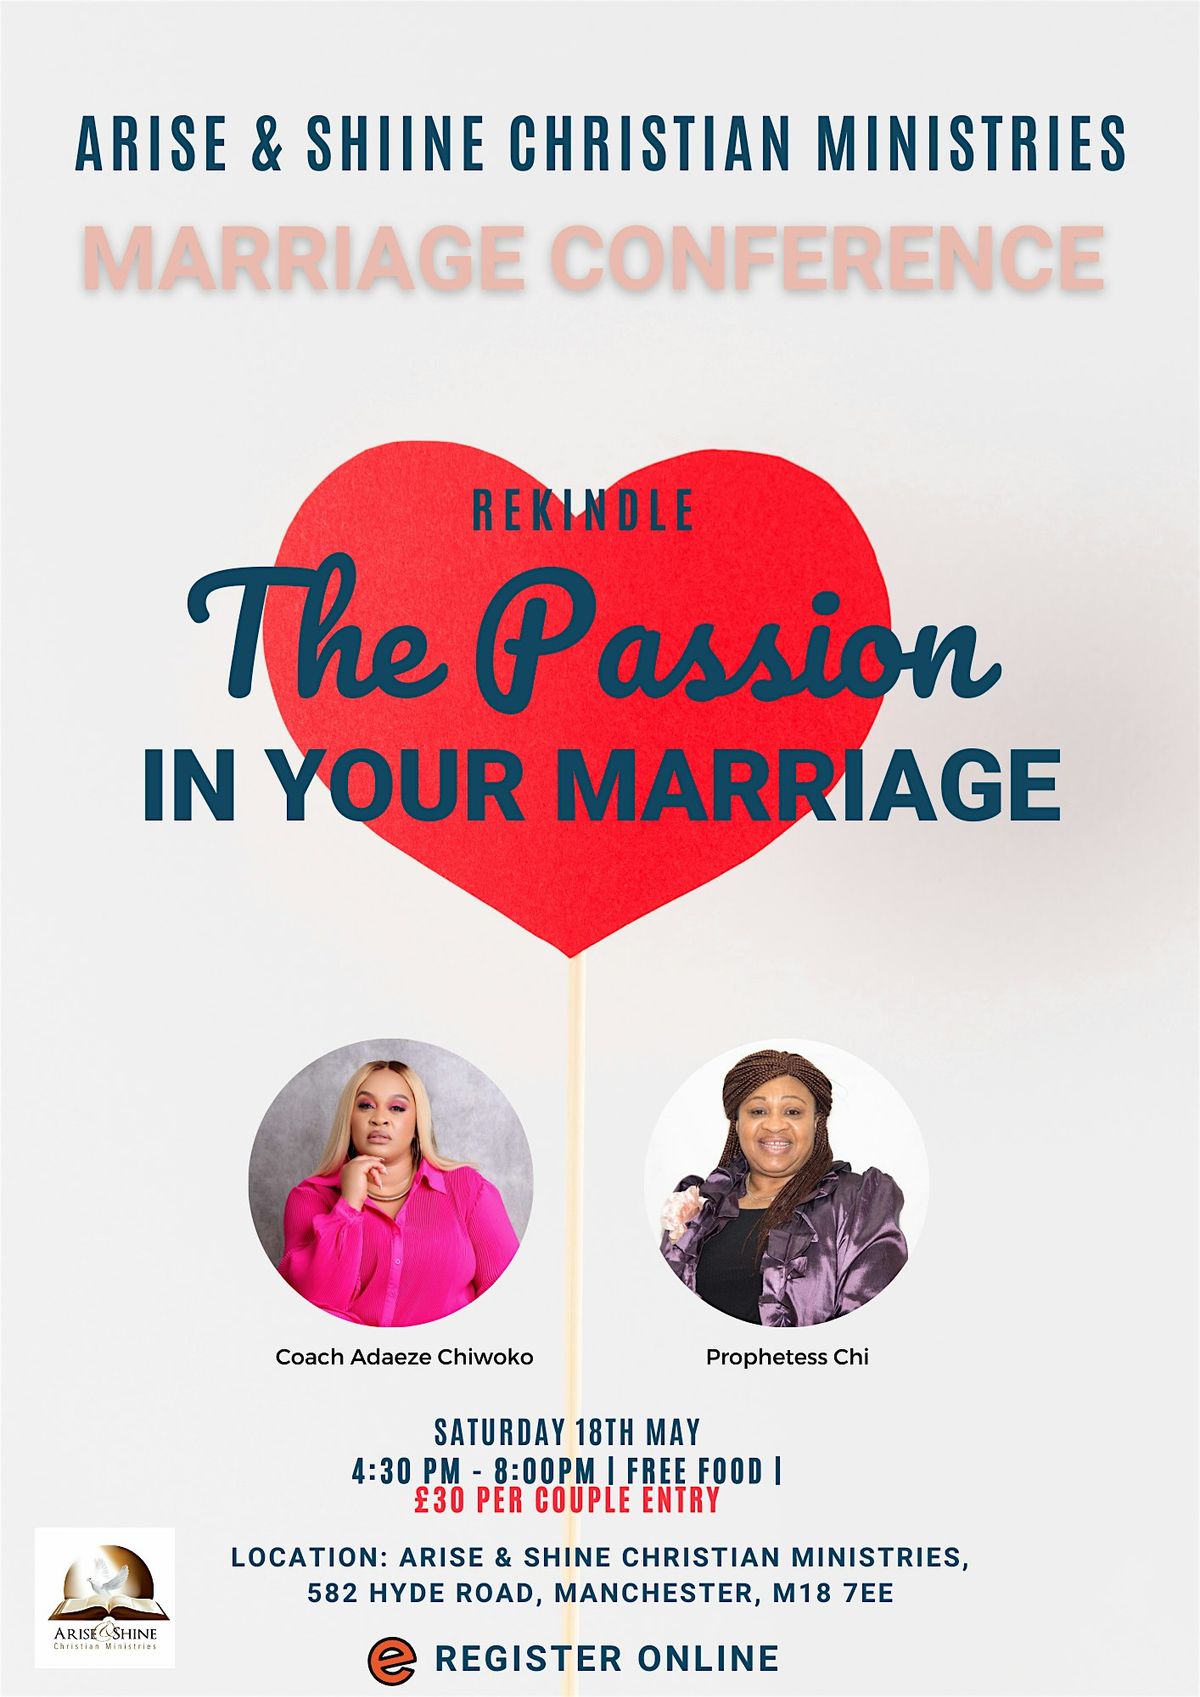 Rekindle the Passion In Your Marriage